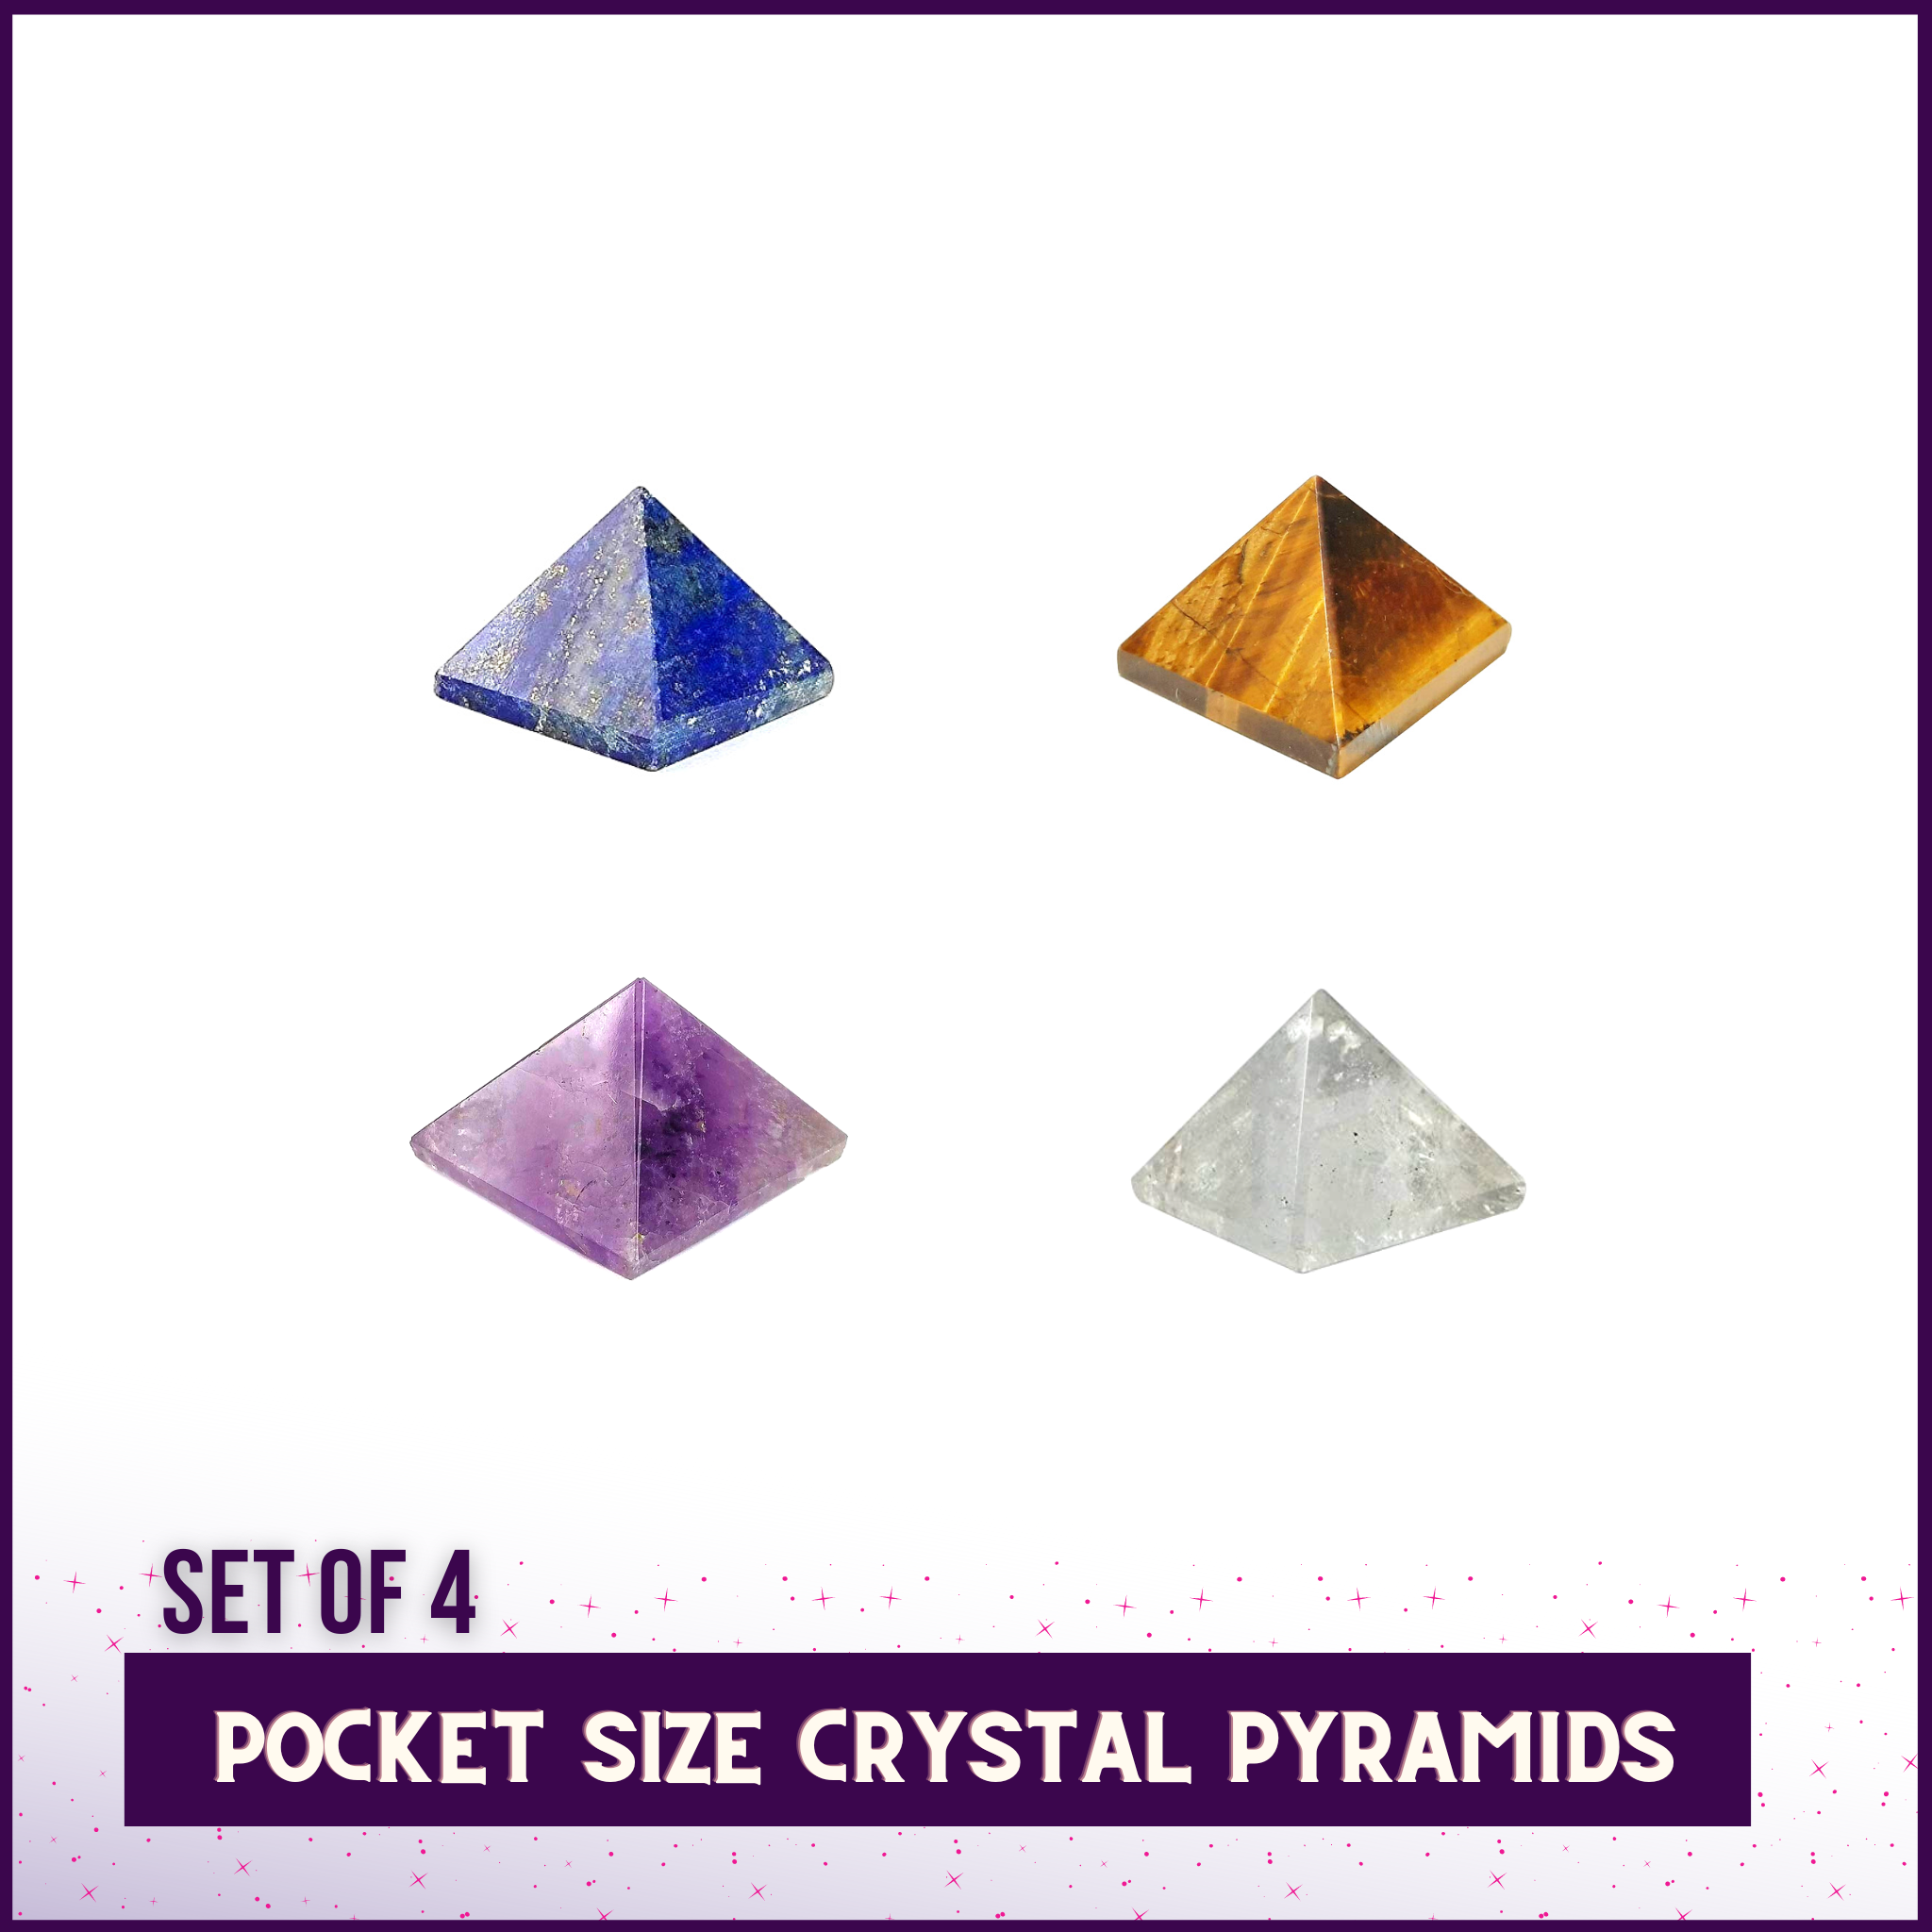 Pocket Size Portable Crystal Pyramids(10mm) For Wallets, Clutches & Handbags - Set of 4